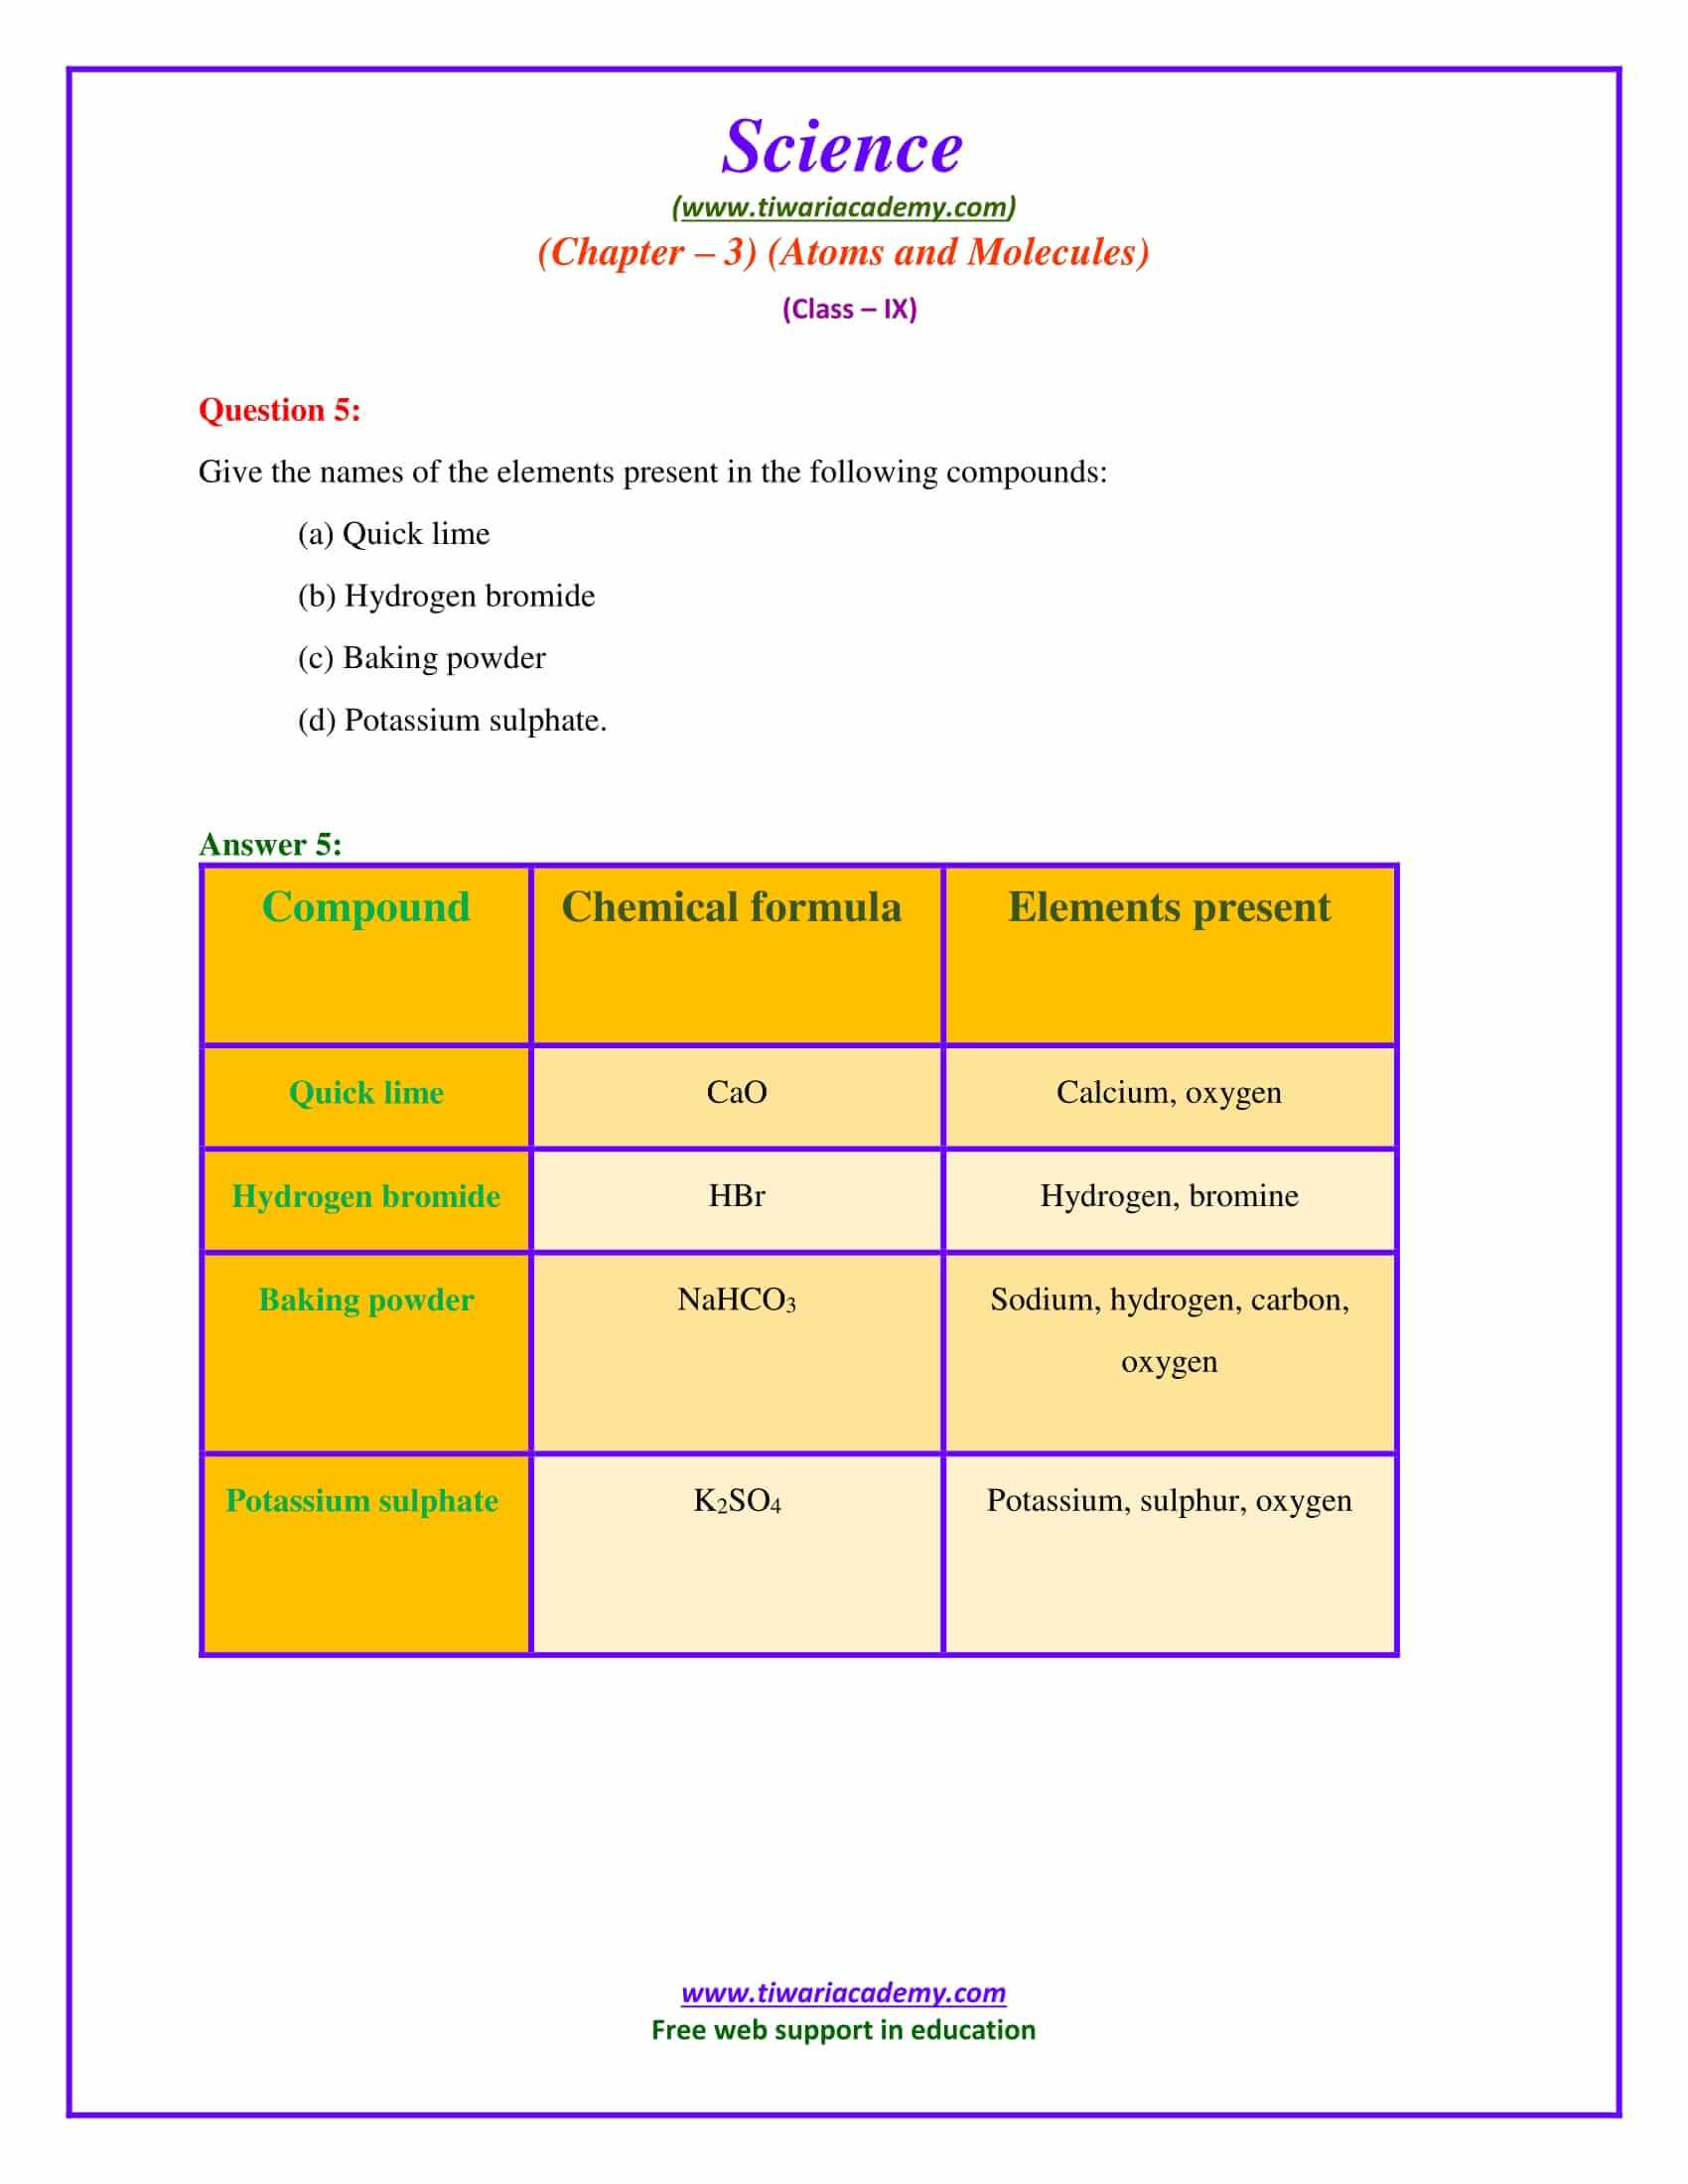 NCERT Solutions for Class 9 Science Chapter 3 Atoms and Molecules Exercises Question answers in pdf form